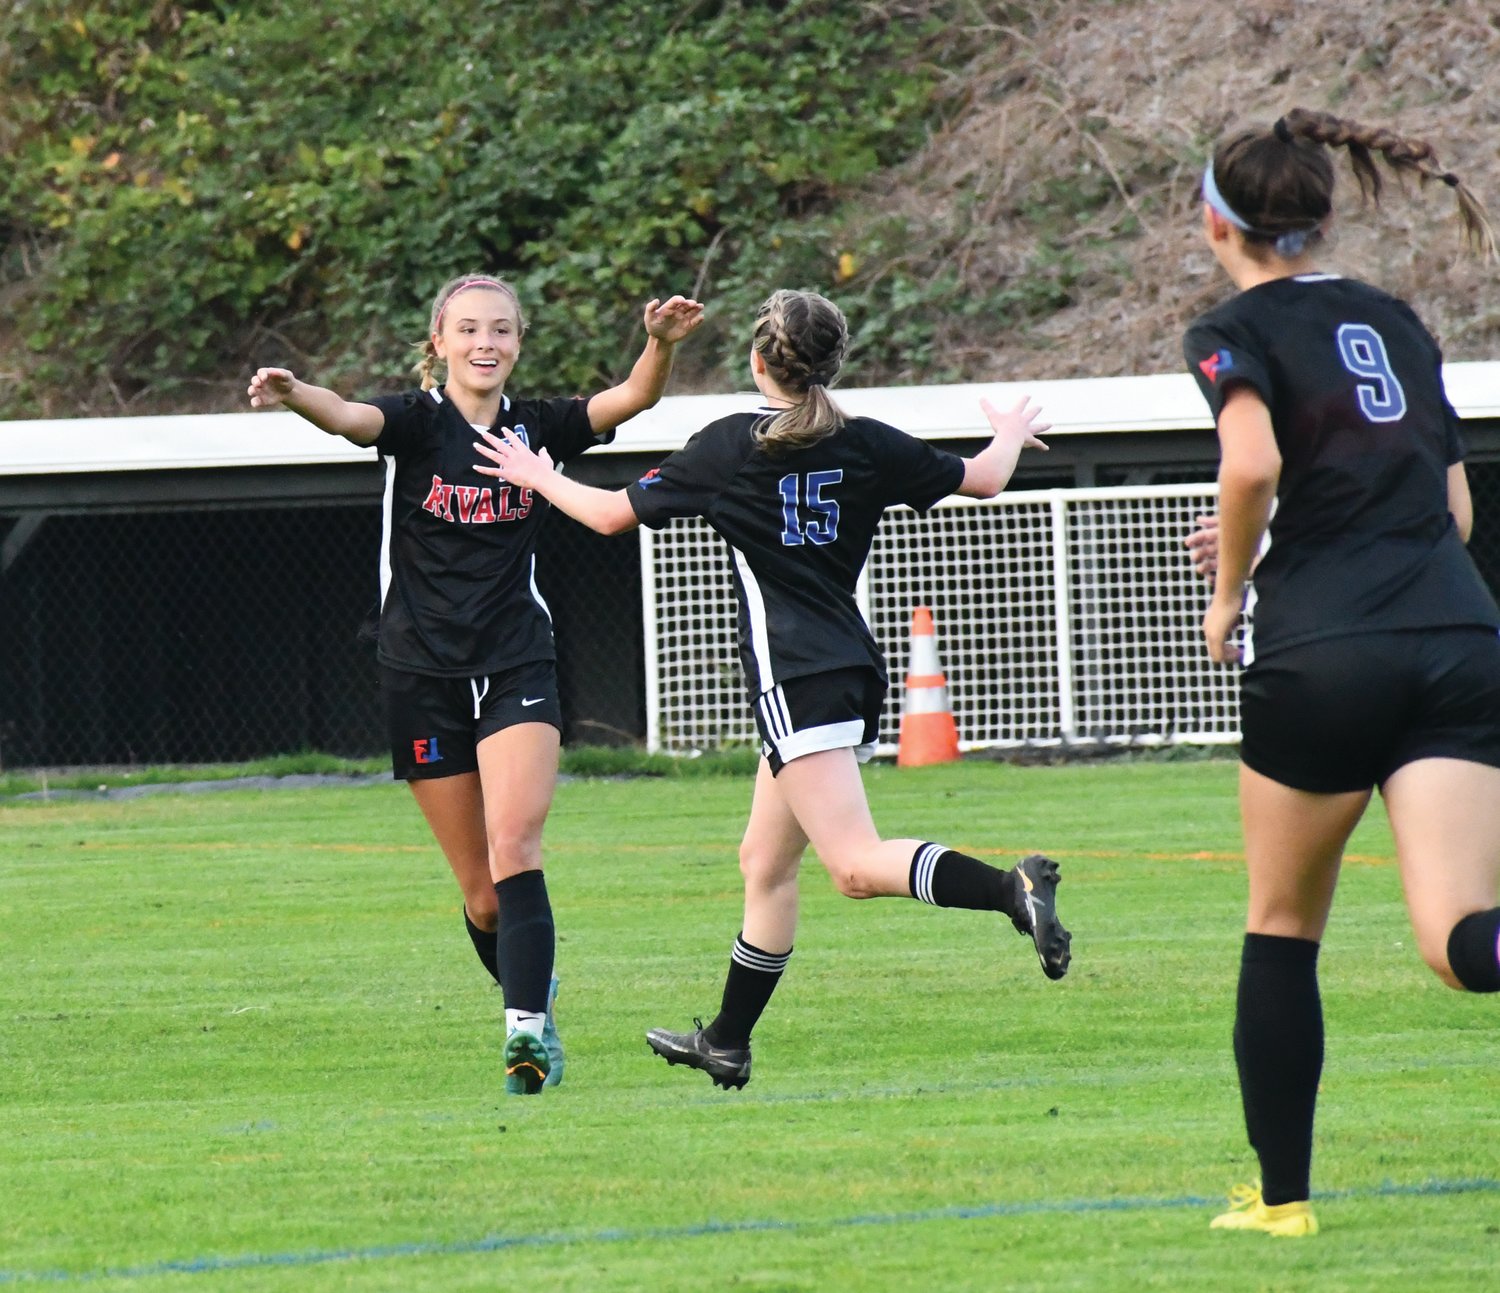 Junior midfielder Iris Mattern celebrates with teammates Ava Shiflett and Kaylen Pray after scoring her first goal of the game in the opening half.